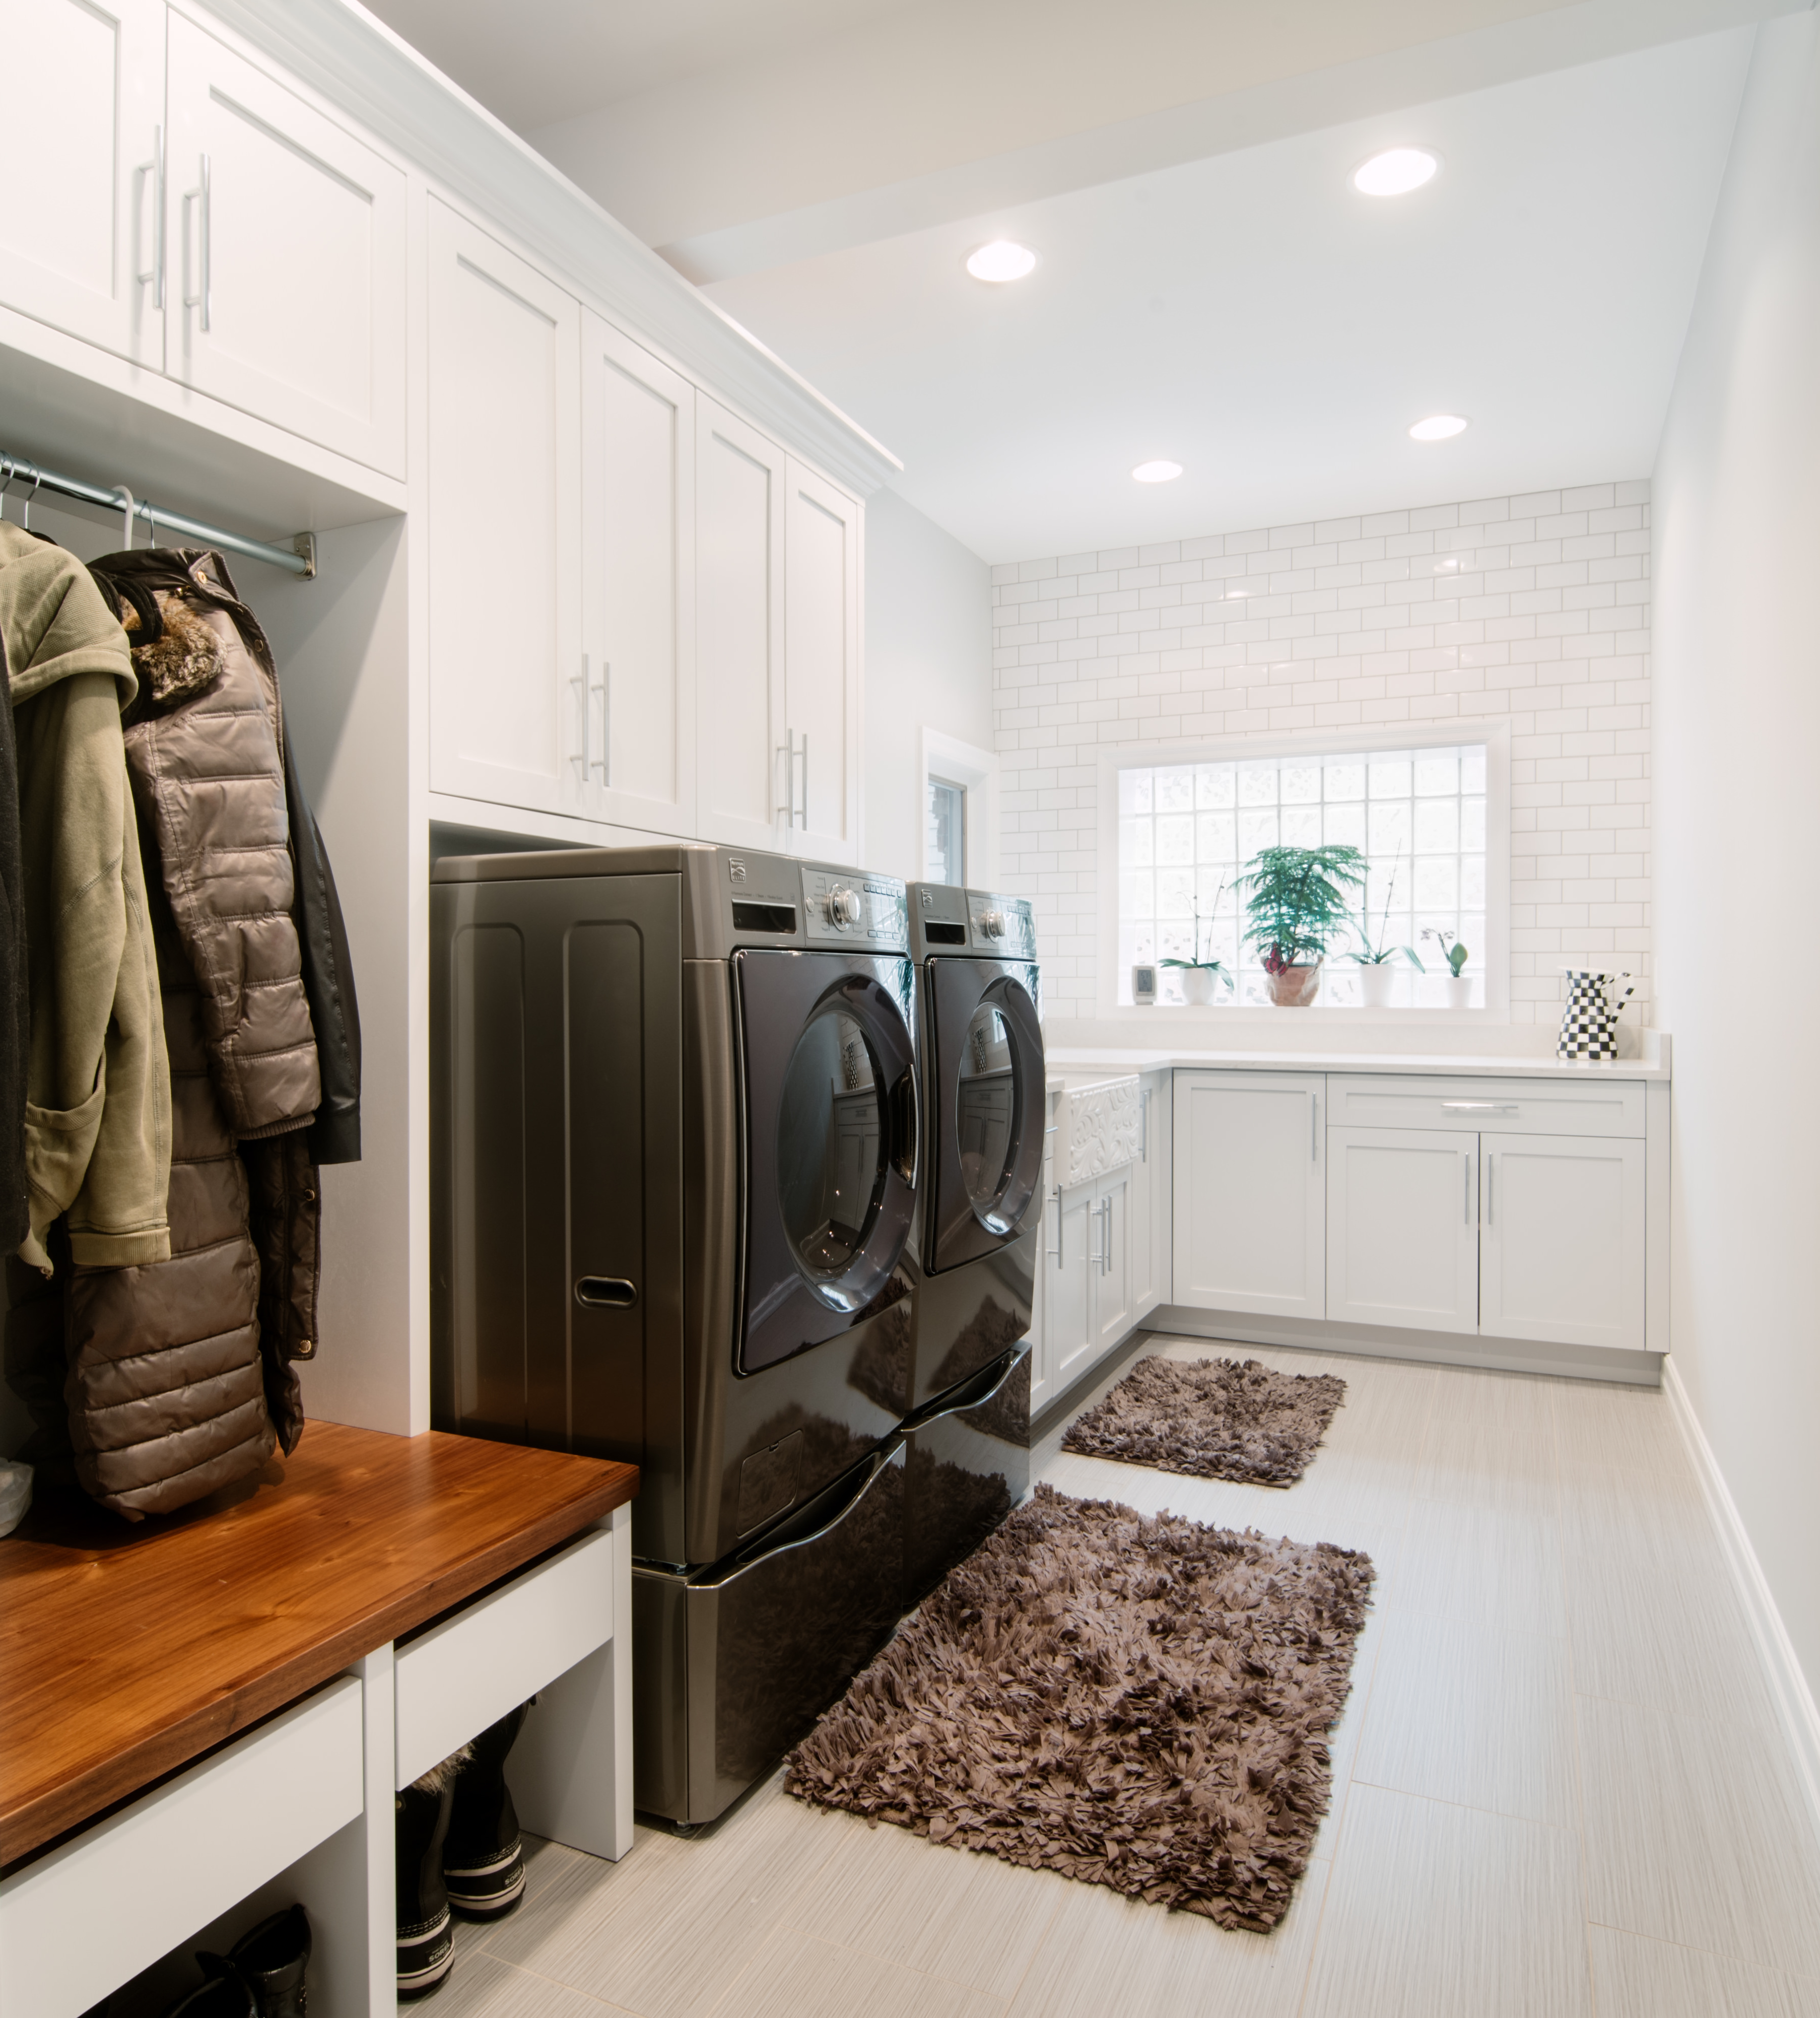 Laundry Room And Mudroom Combo Labra Design Build Sunken laundry room and mudroom combo feature gray cabinets with brass pull and a vintage wall mount sink faucet beside a subway tiled dog tub. http labradesignbuild com portfolio laundry room mudroom combo